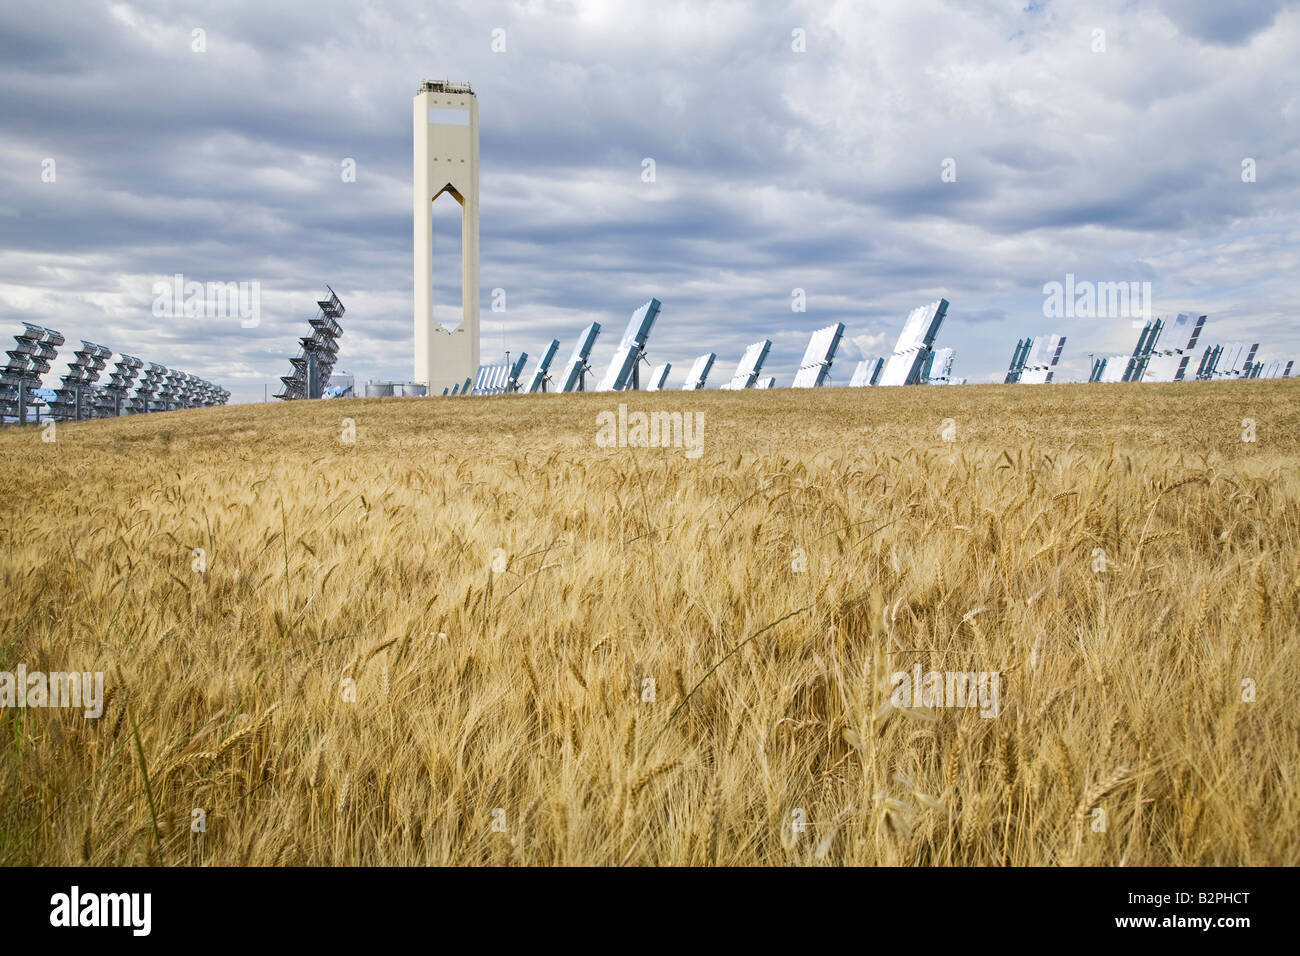 Photovoltaic plant and solar tower, Seville, Spain Stock Photo